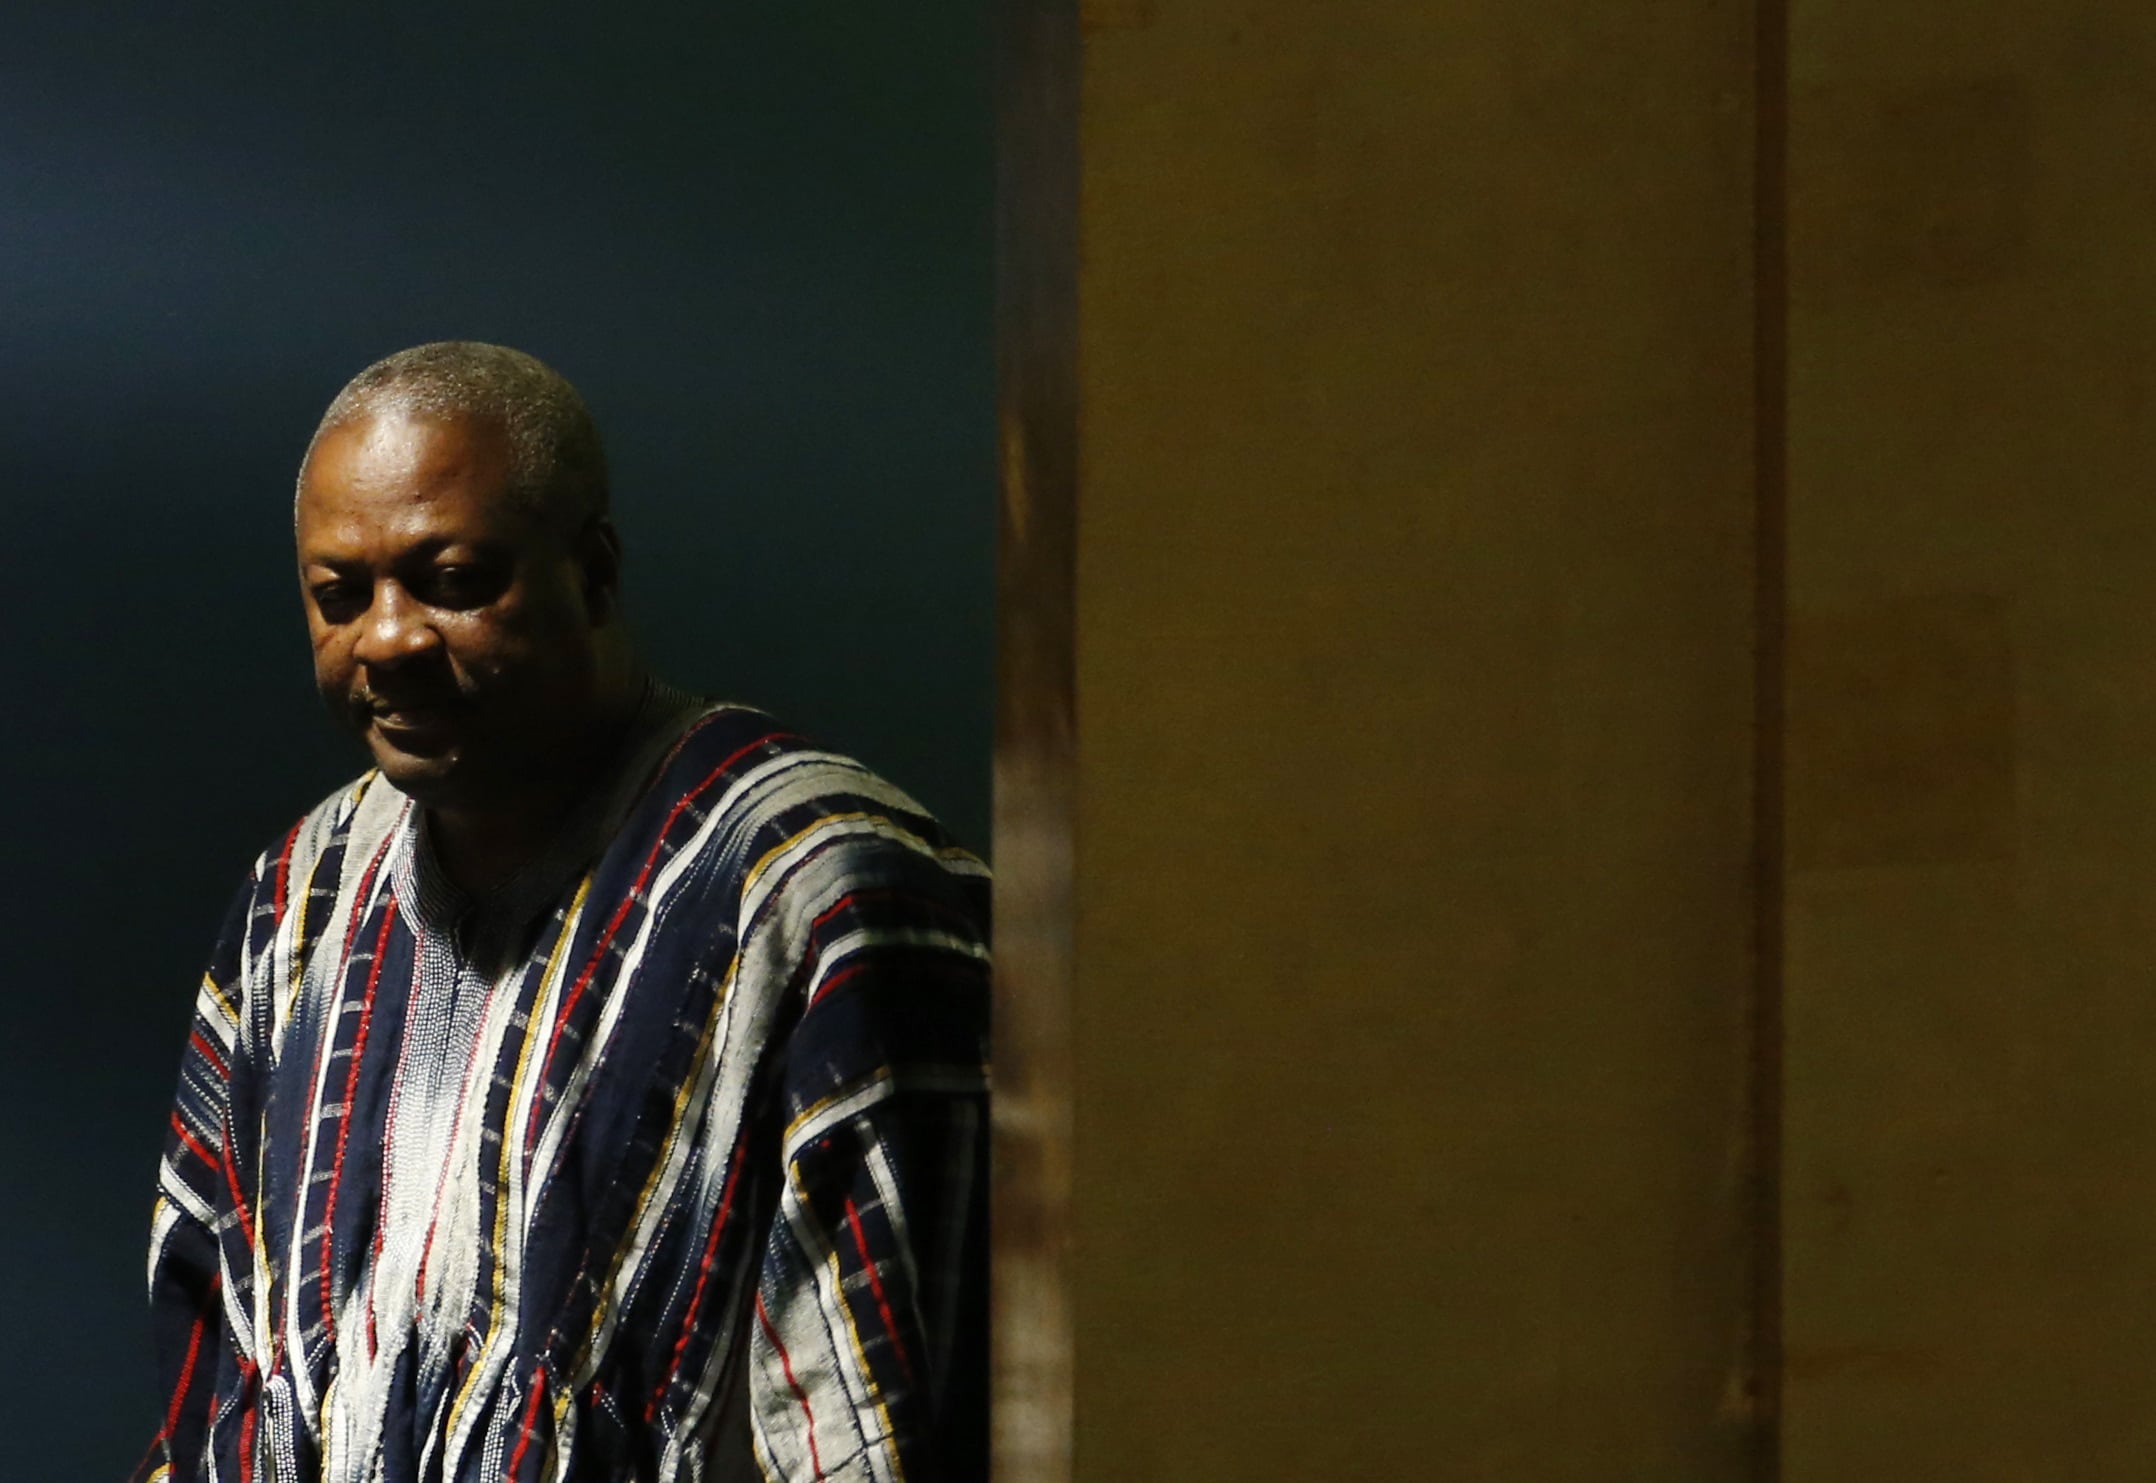 President John Dramani Mahama of Ghana arrives to address attendees during the 70th session of the United Nations General Assembly in New York, 30 September 2015, REUTERS/Mike Segar